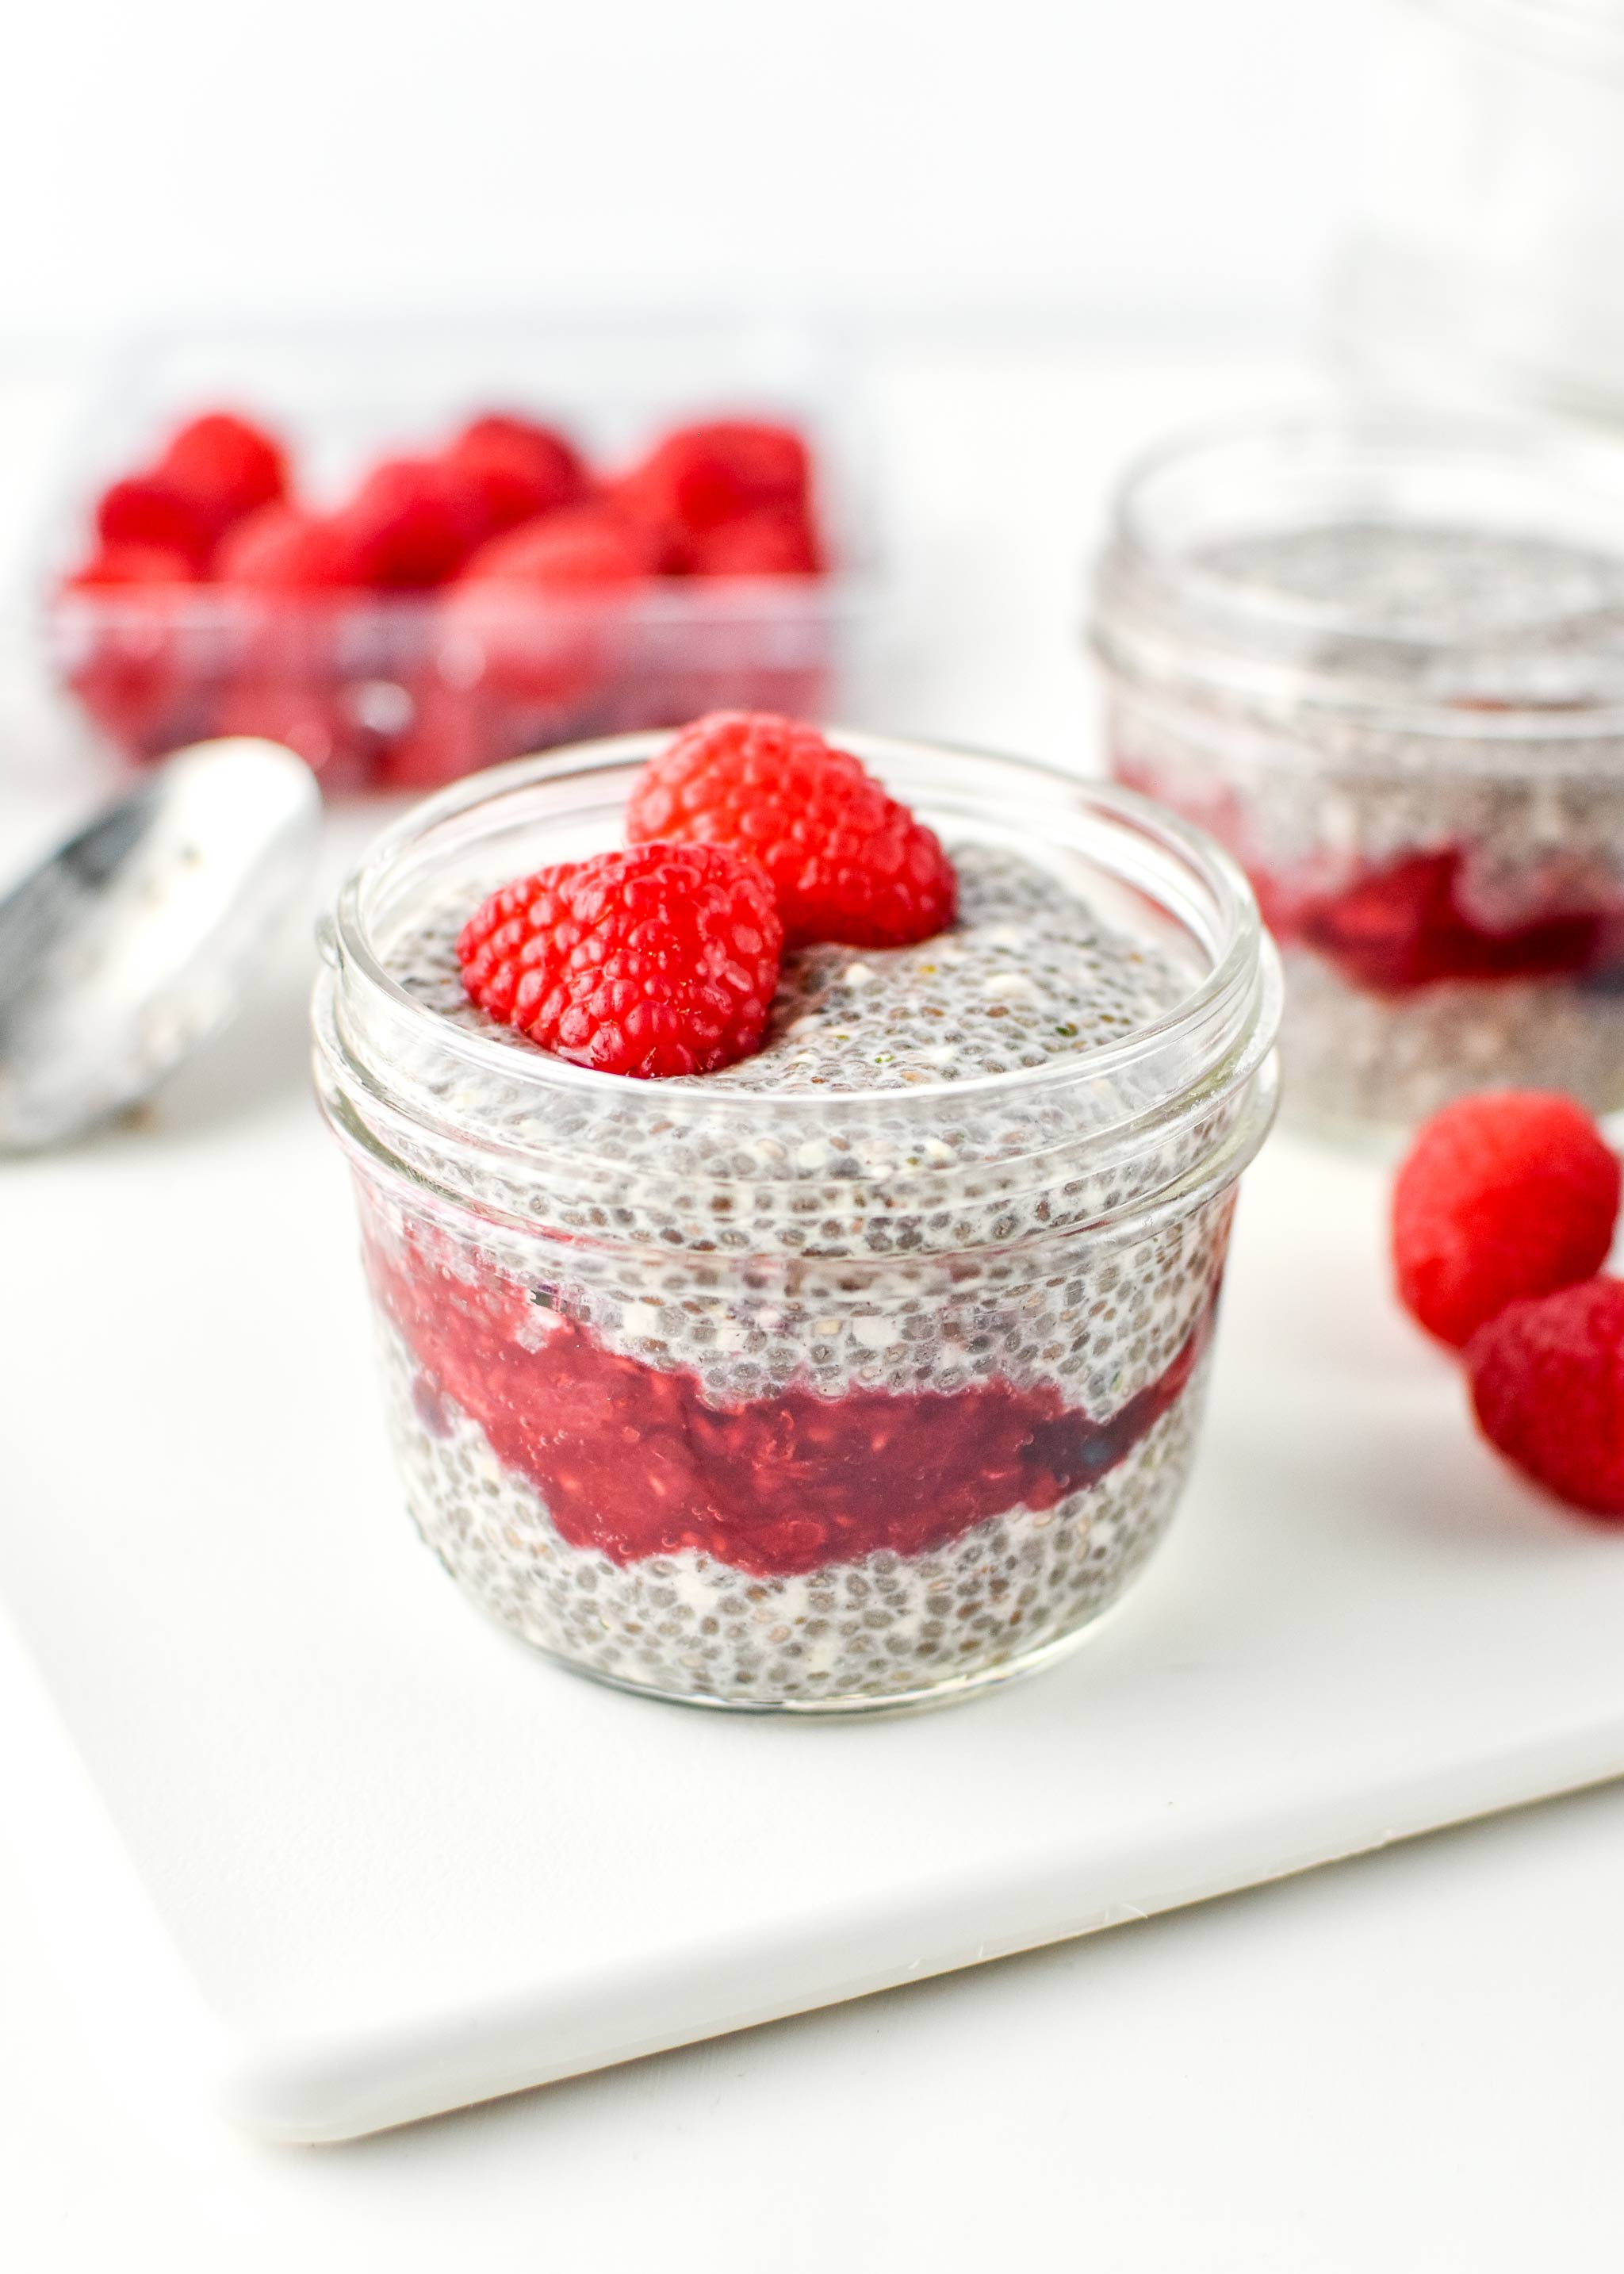 Chia pudding breakfast parfait with raspberries on top